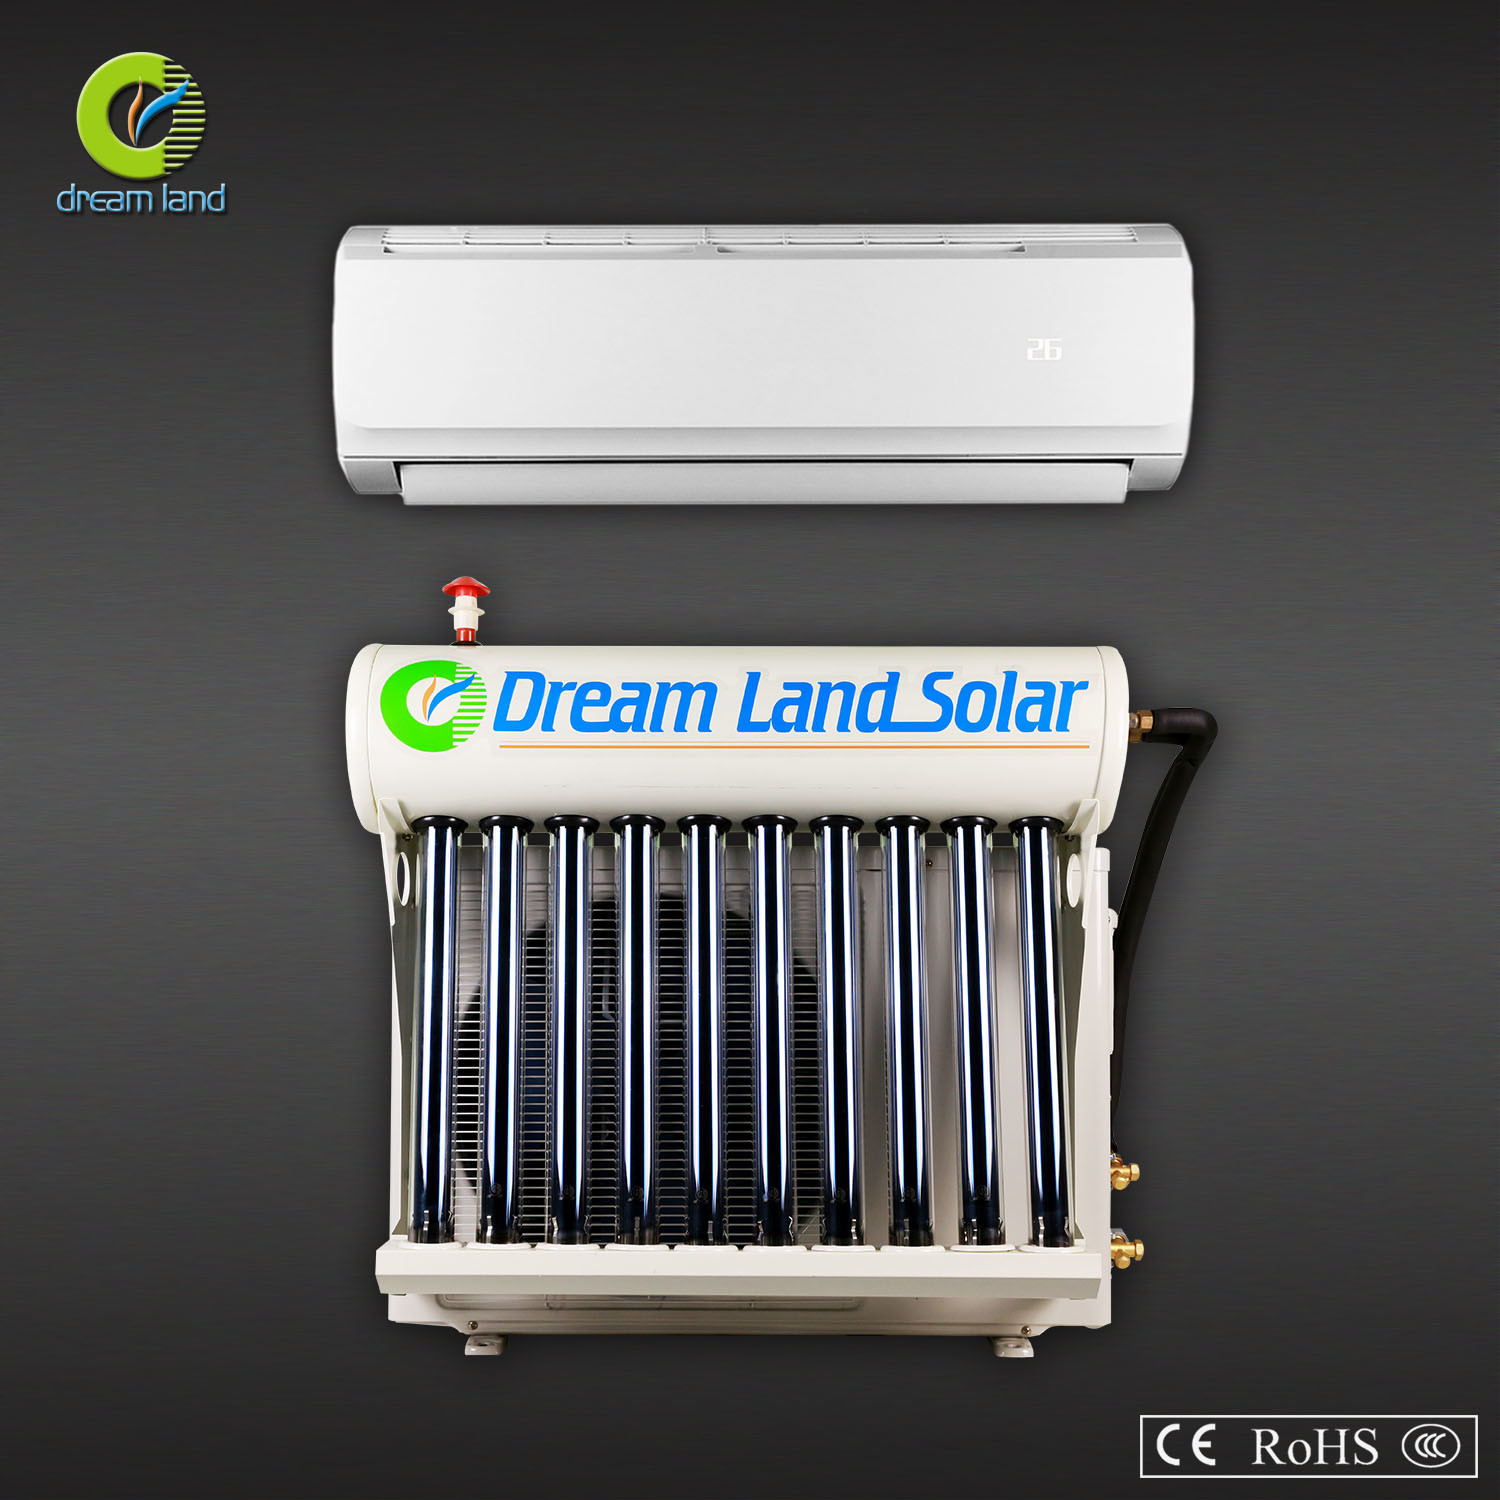 Vacuum Tube Wall-Installed Air Conditioner Tkf (R) -26gw 60Hz